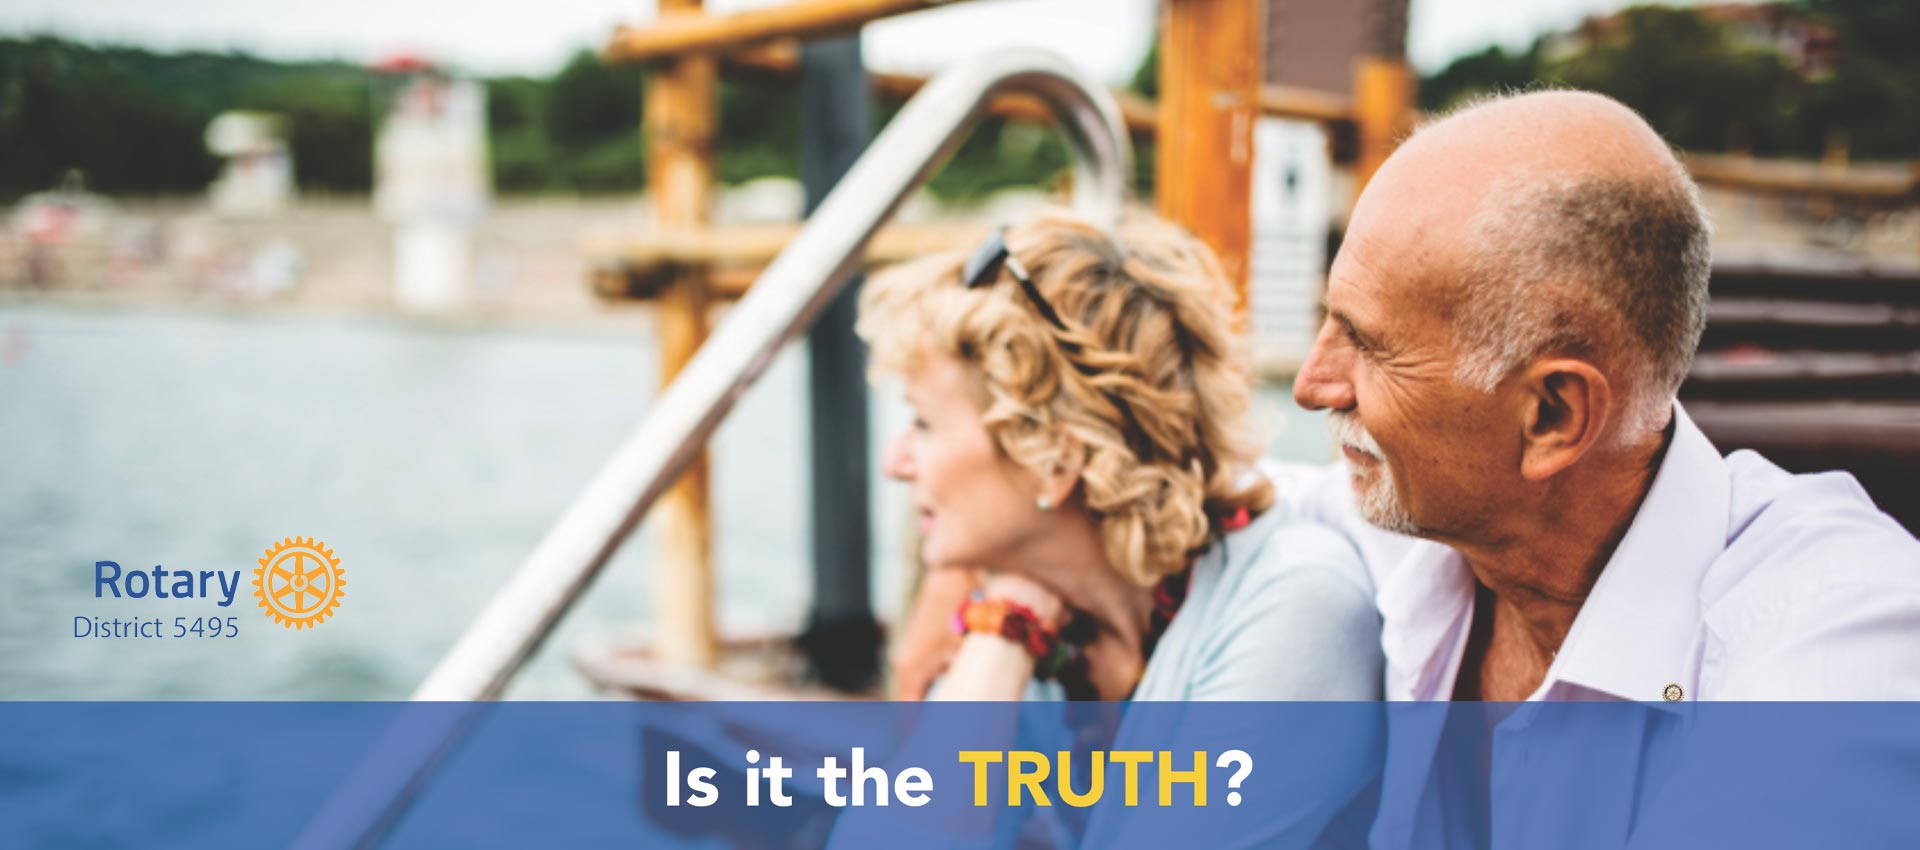 Rotarians on Vacation with text 'Is it the TRUTH?' the first ethical question to ask of the Rotary 4 Way Test.